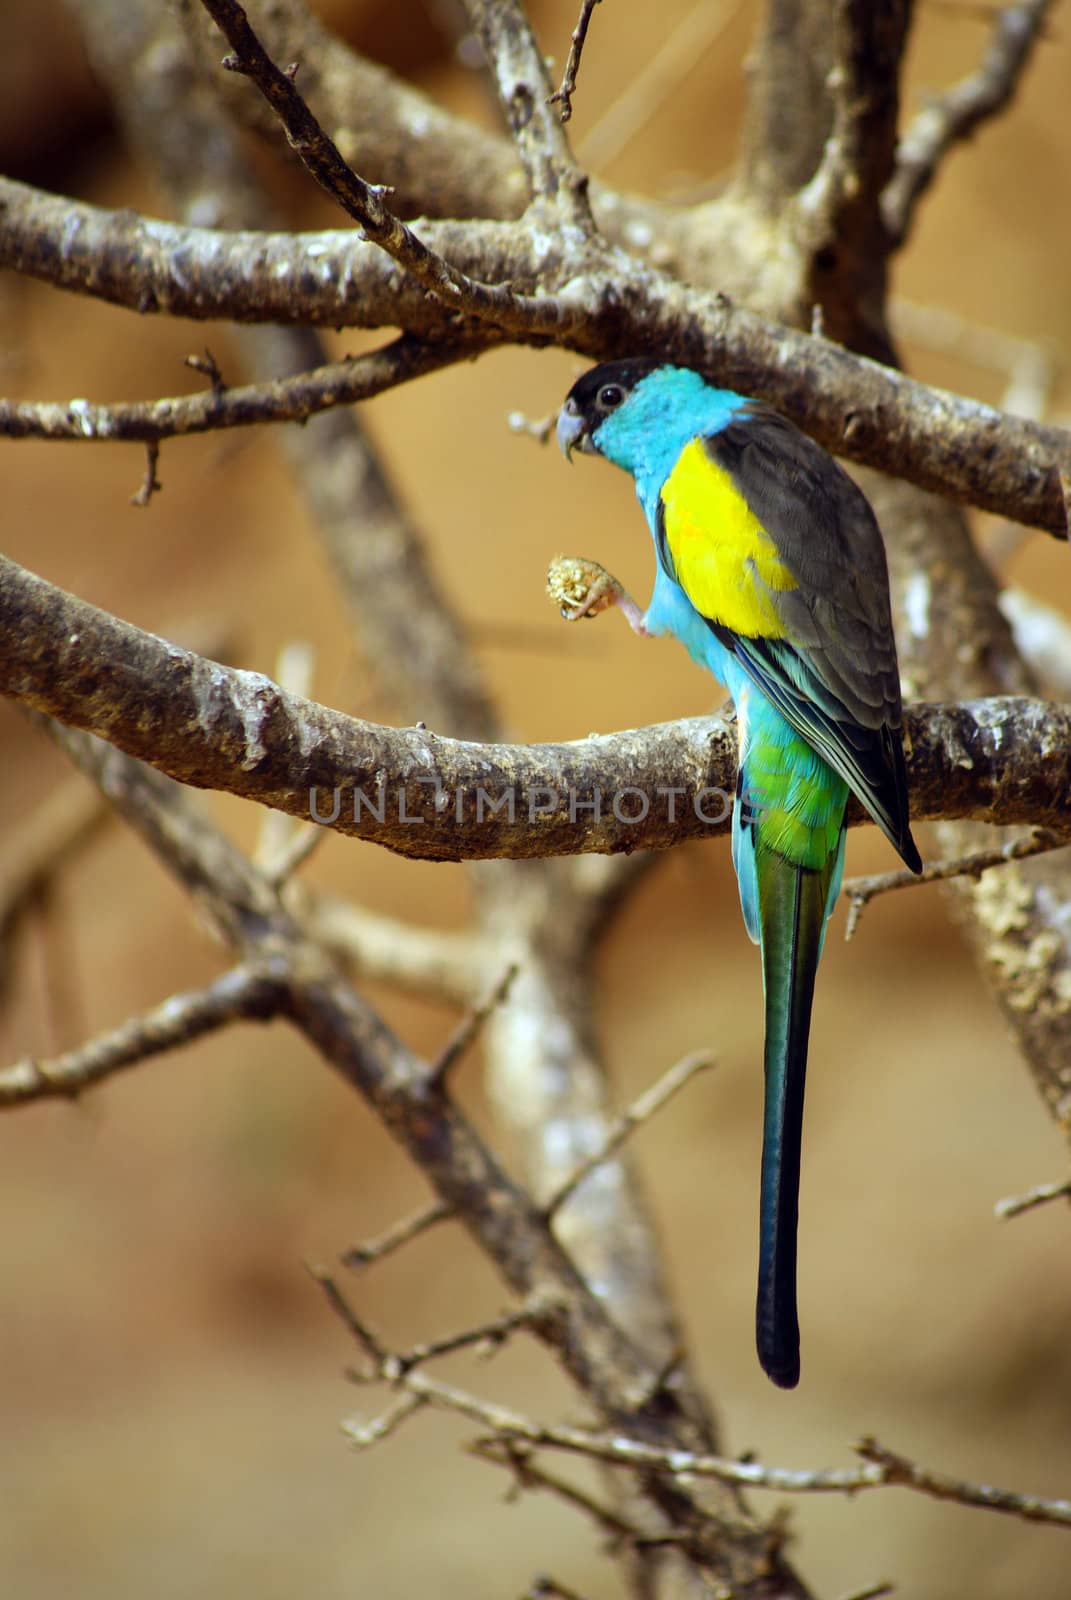 Small parrot eating perched on a wooden bar by merc67